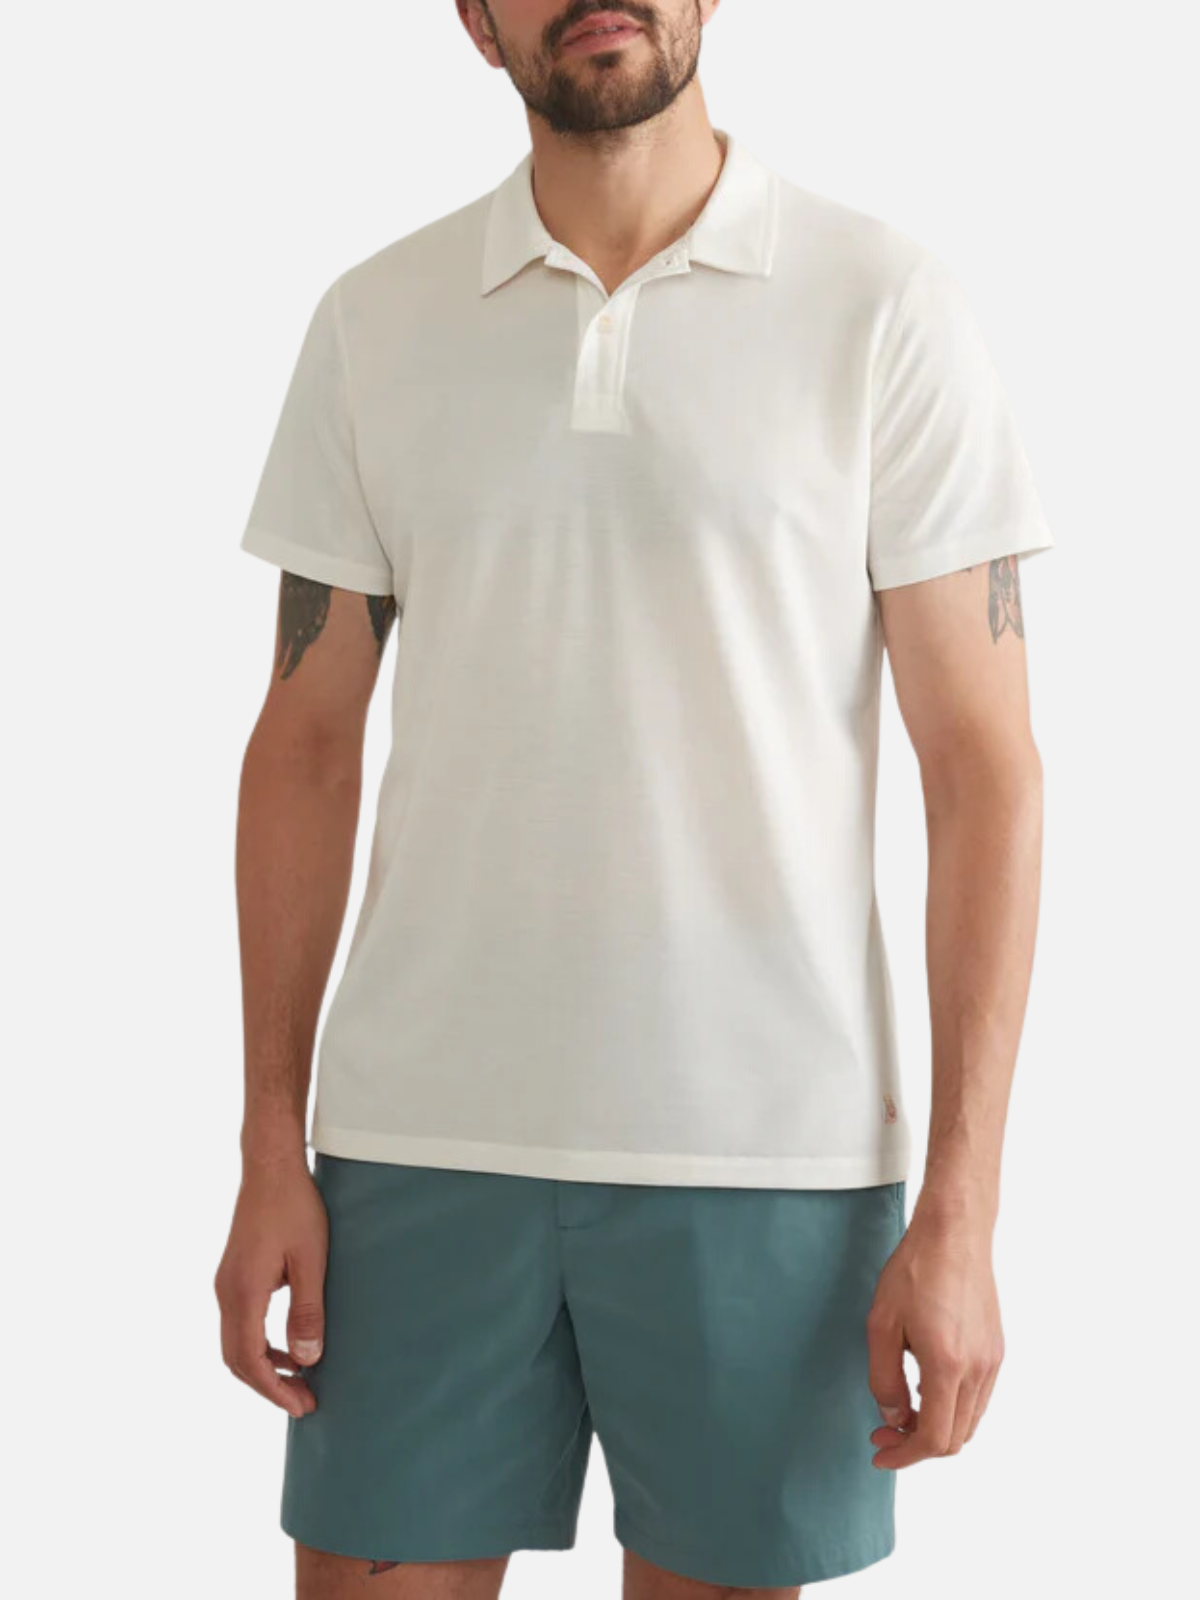 marine layer air polo white recycled polyester lyocell spandex blend kempt athens ga georgia men's clothing store